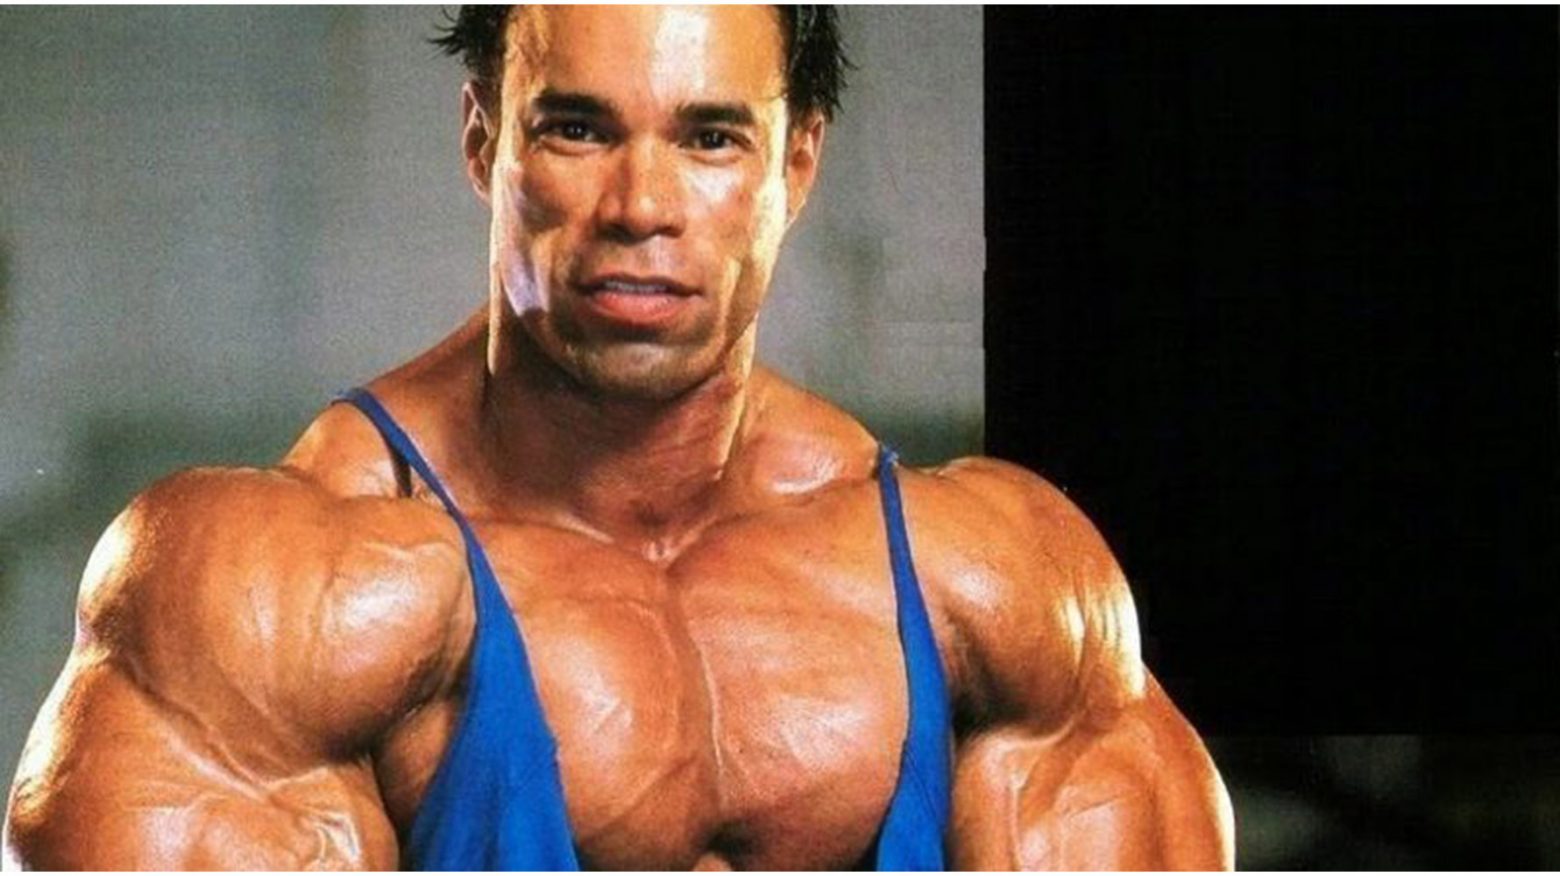 Kevin Levrone and Steroids: Biography & Workout